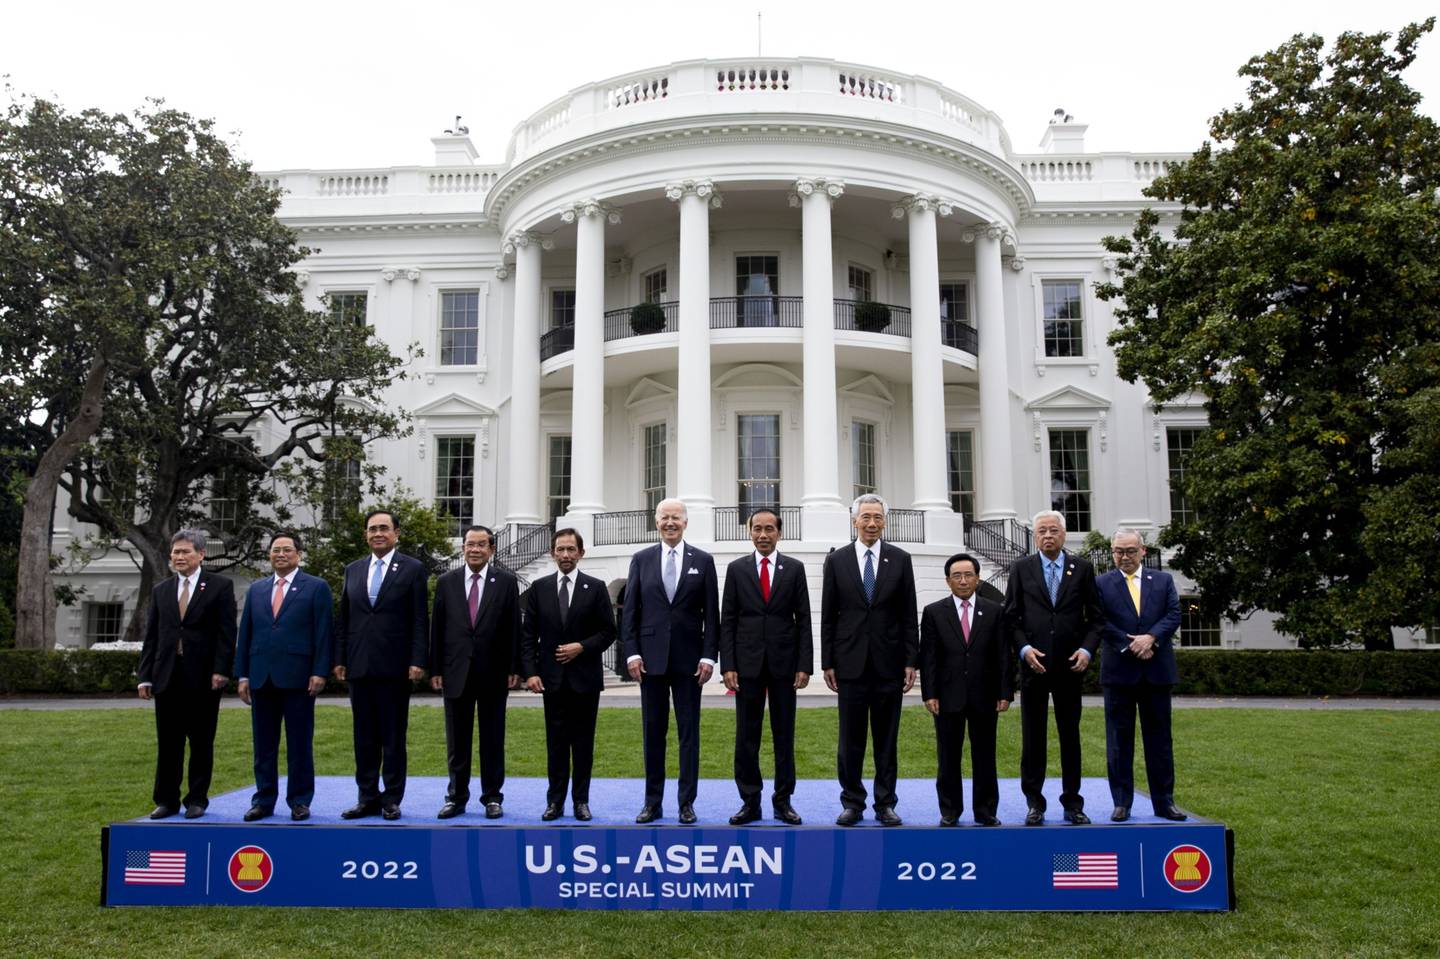 US President Joe Biden in a group photo with leaders of Asean countries outside the White House. Bloomberg